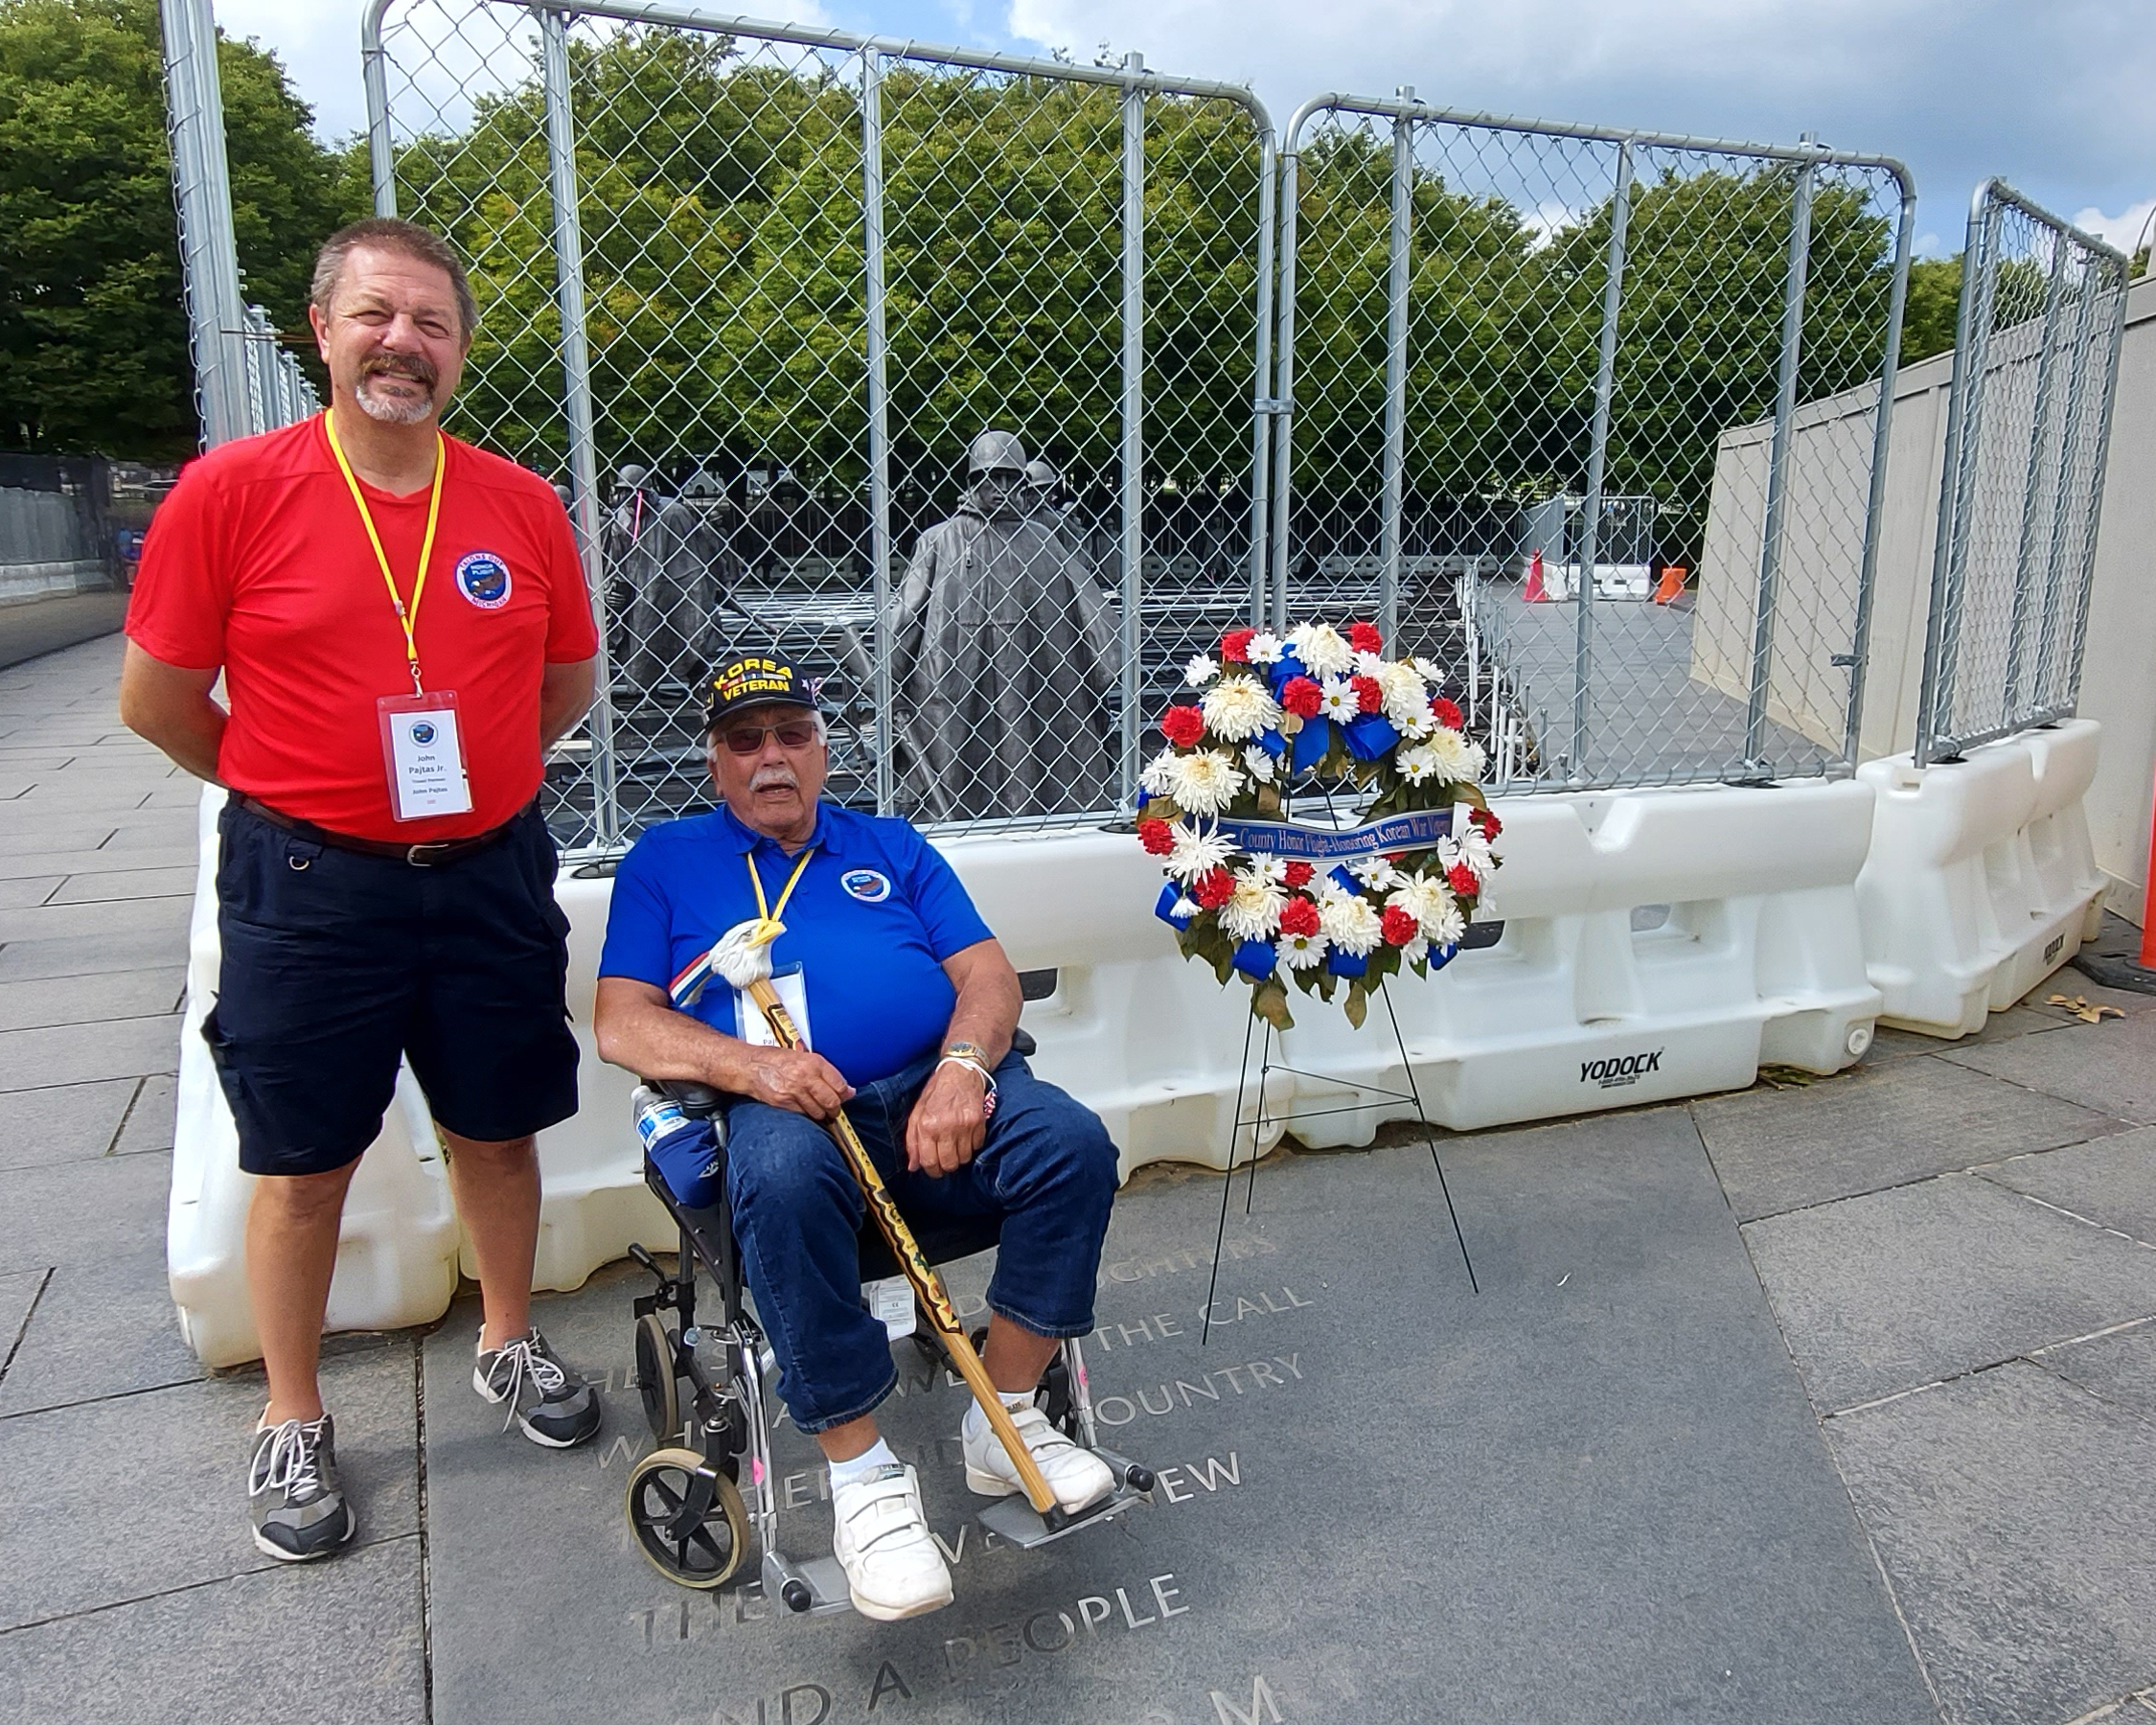 Fenced off as it undergoes improvements and expansion, the Korean War Memorial was still a must-see stop for father-and-son John Pajtas Sr. and Jr., both Shiawassee County Farm Bureau members.